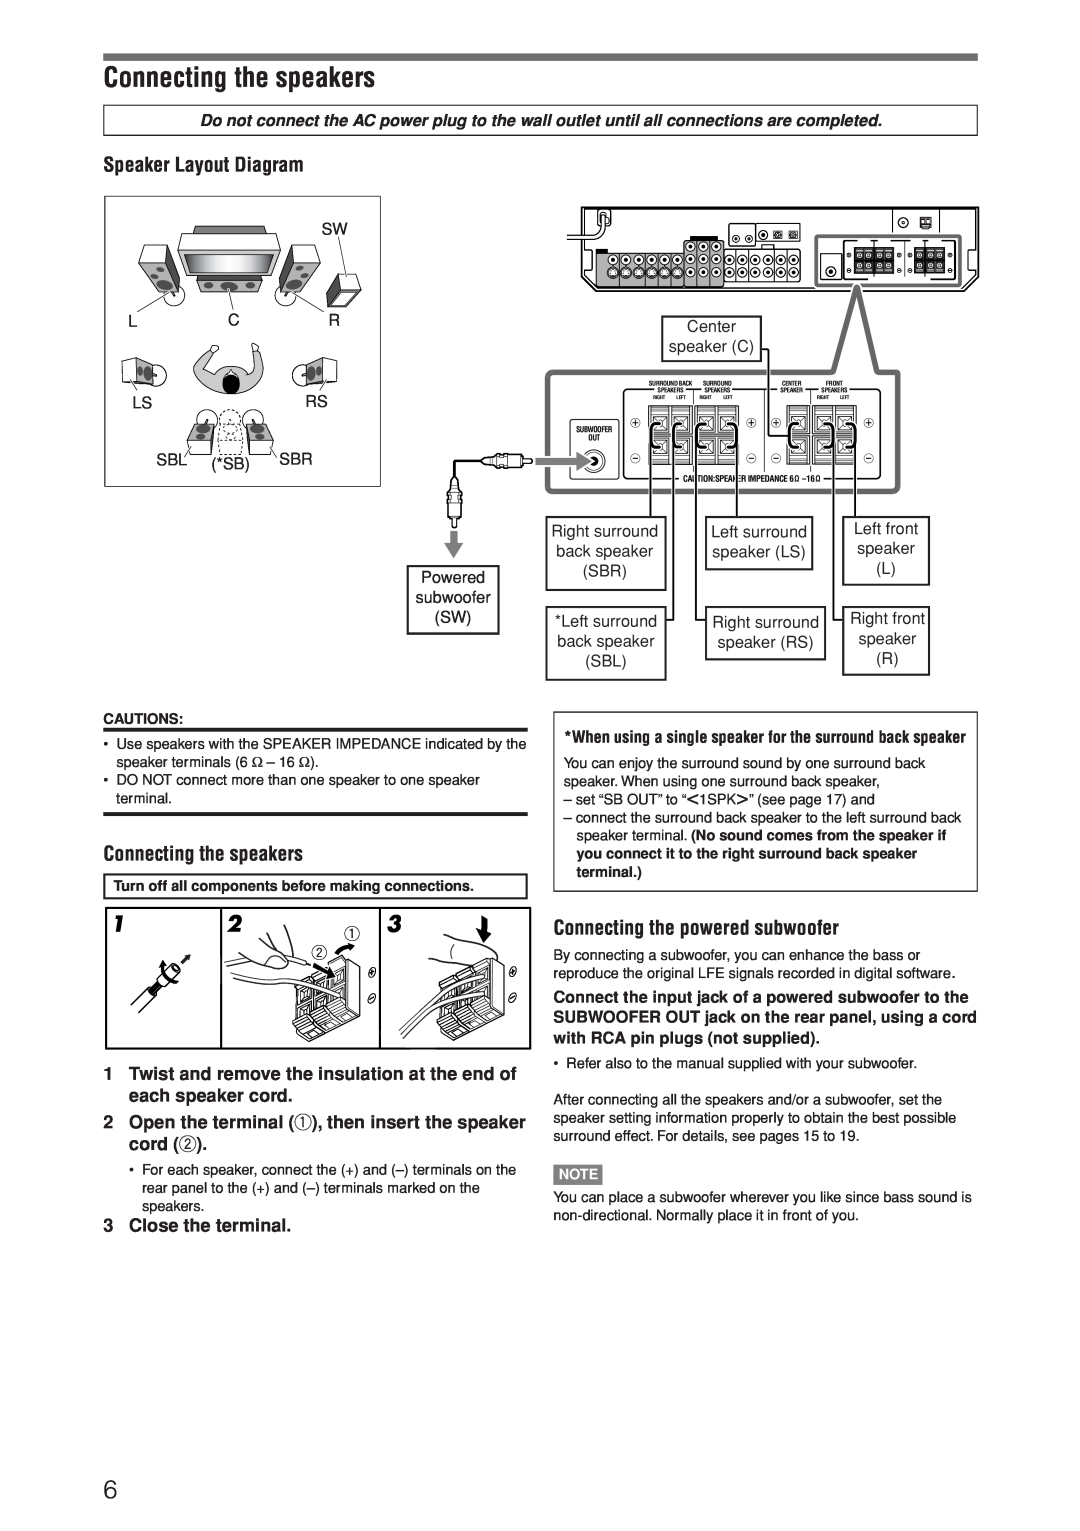 JVC RX-D206B manual Connecting the speakers, Speaker Layout Diagram, Connecting the powered subwoofer, Close the terminal 